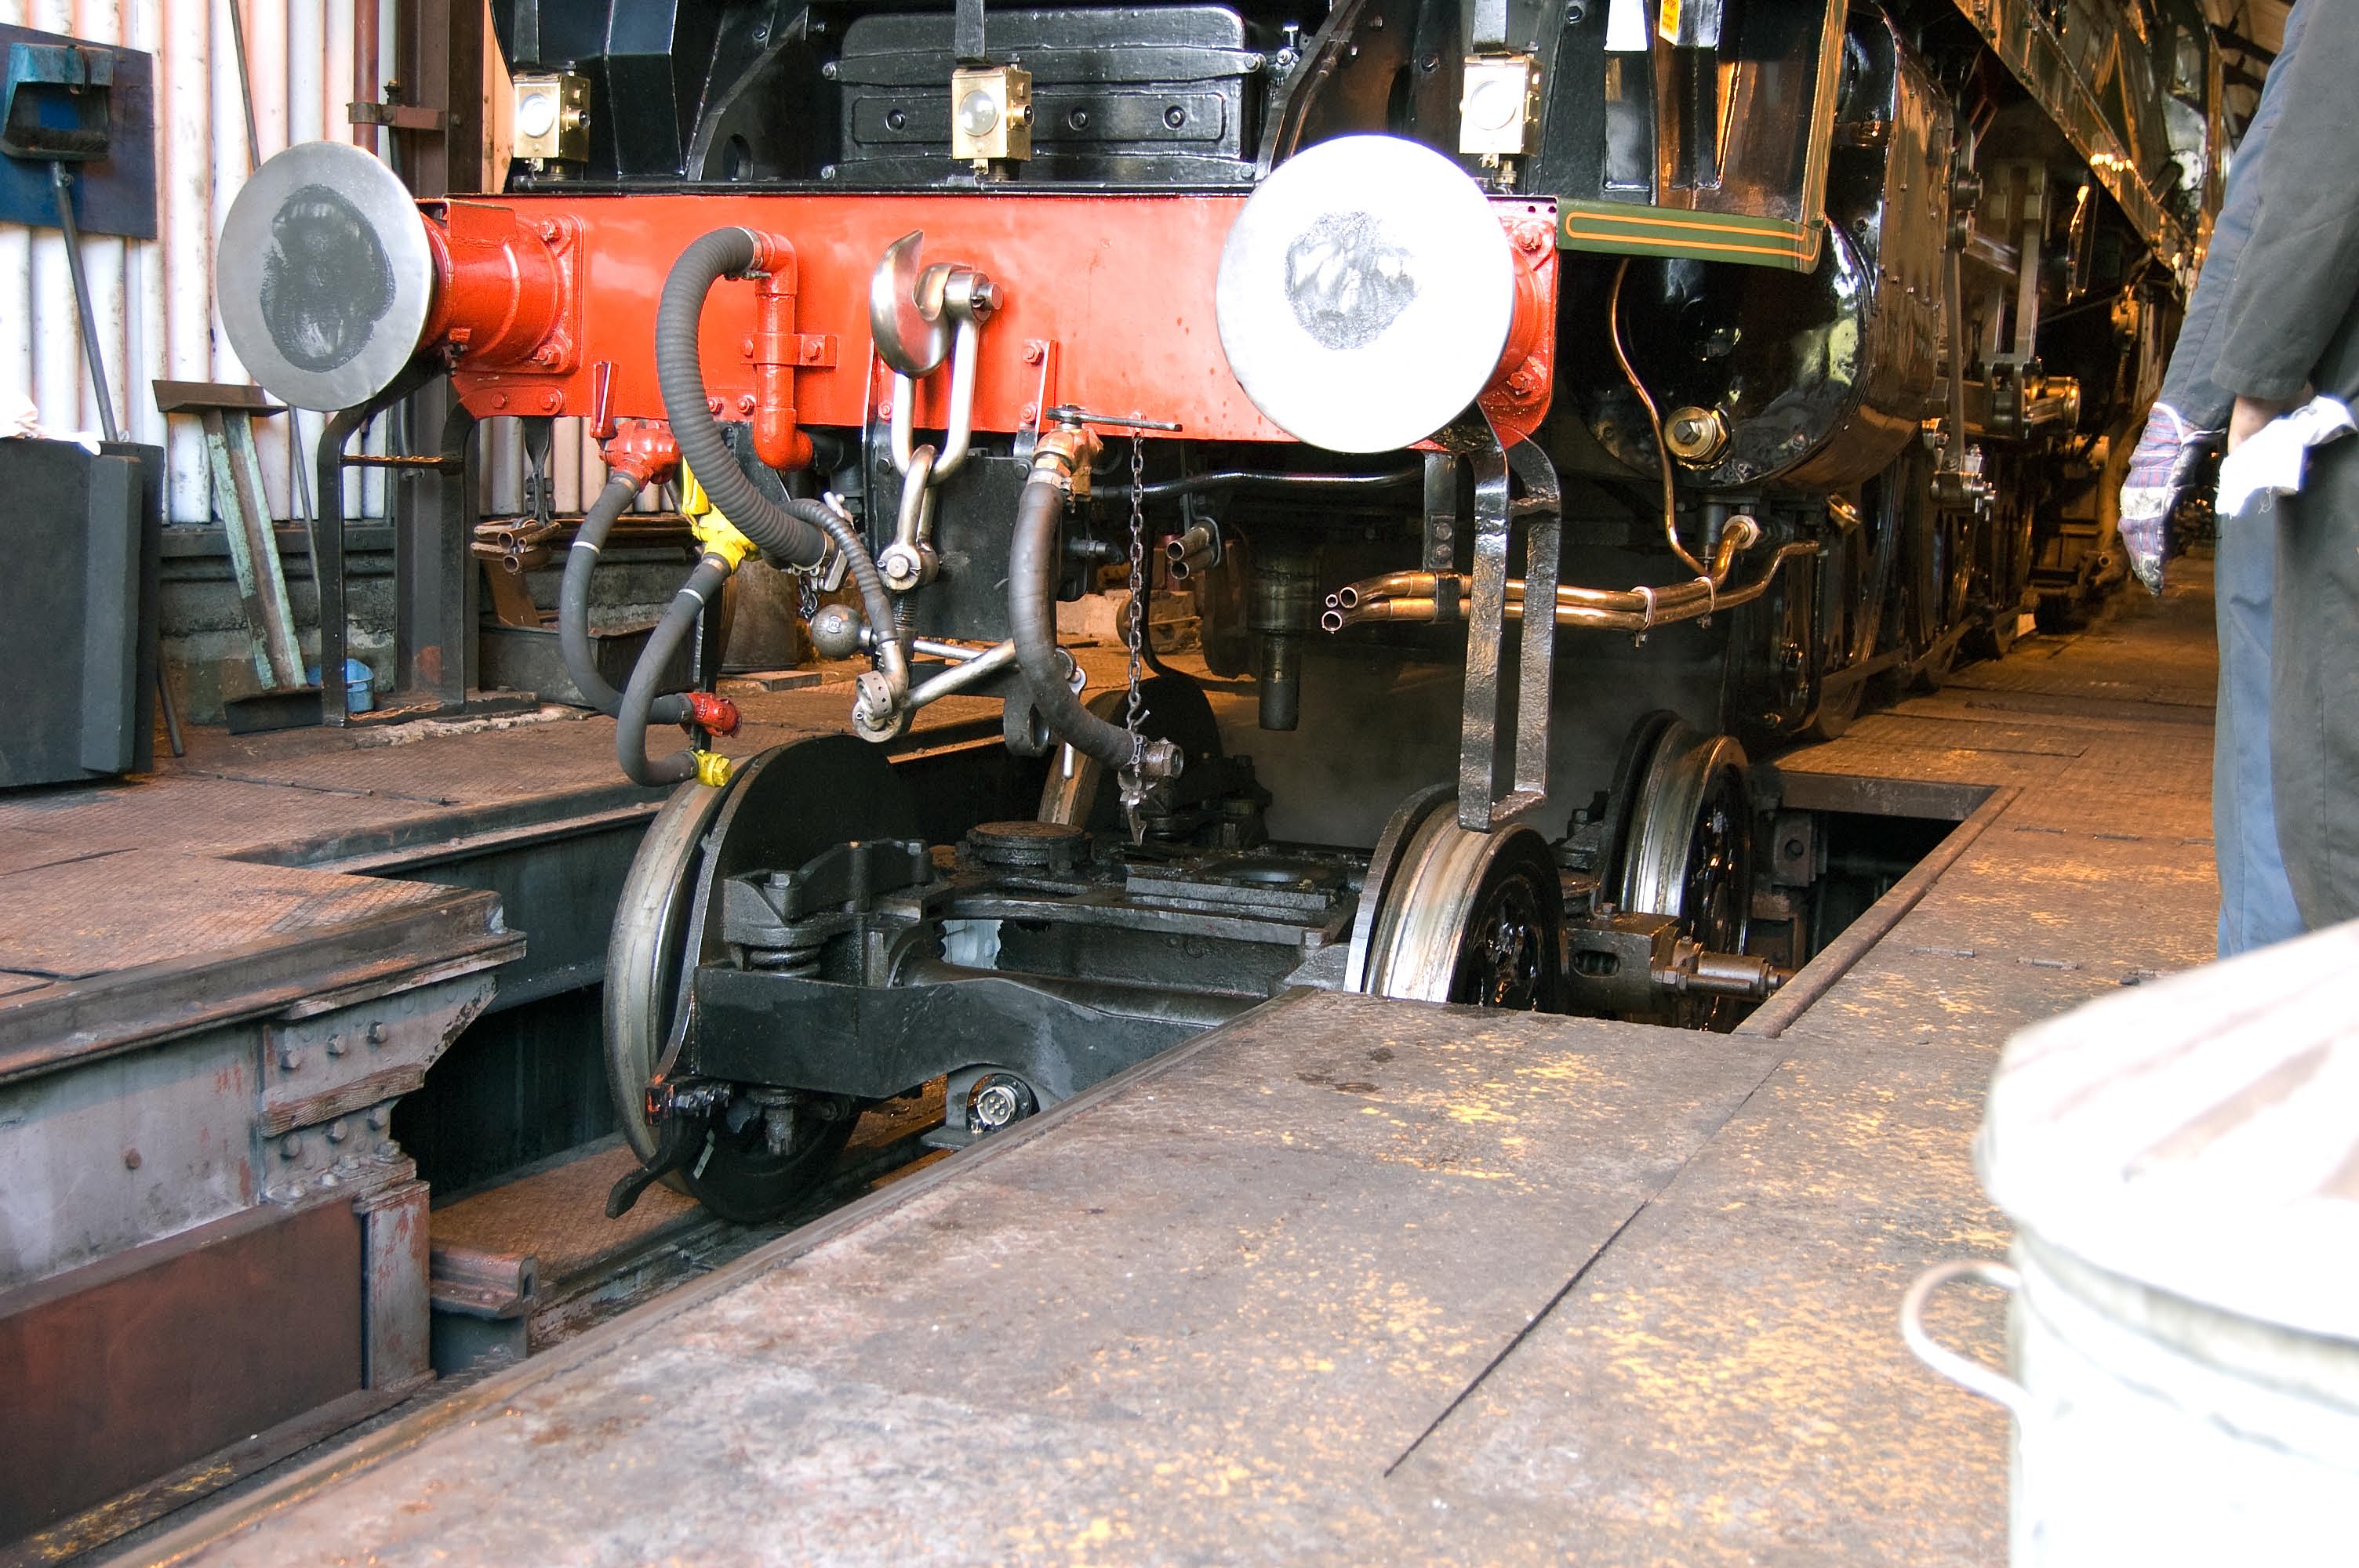 The bogie is lowered by the Ropley wheeldrop, so that some of the rivets can be attended to.